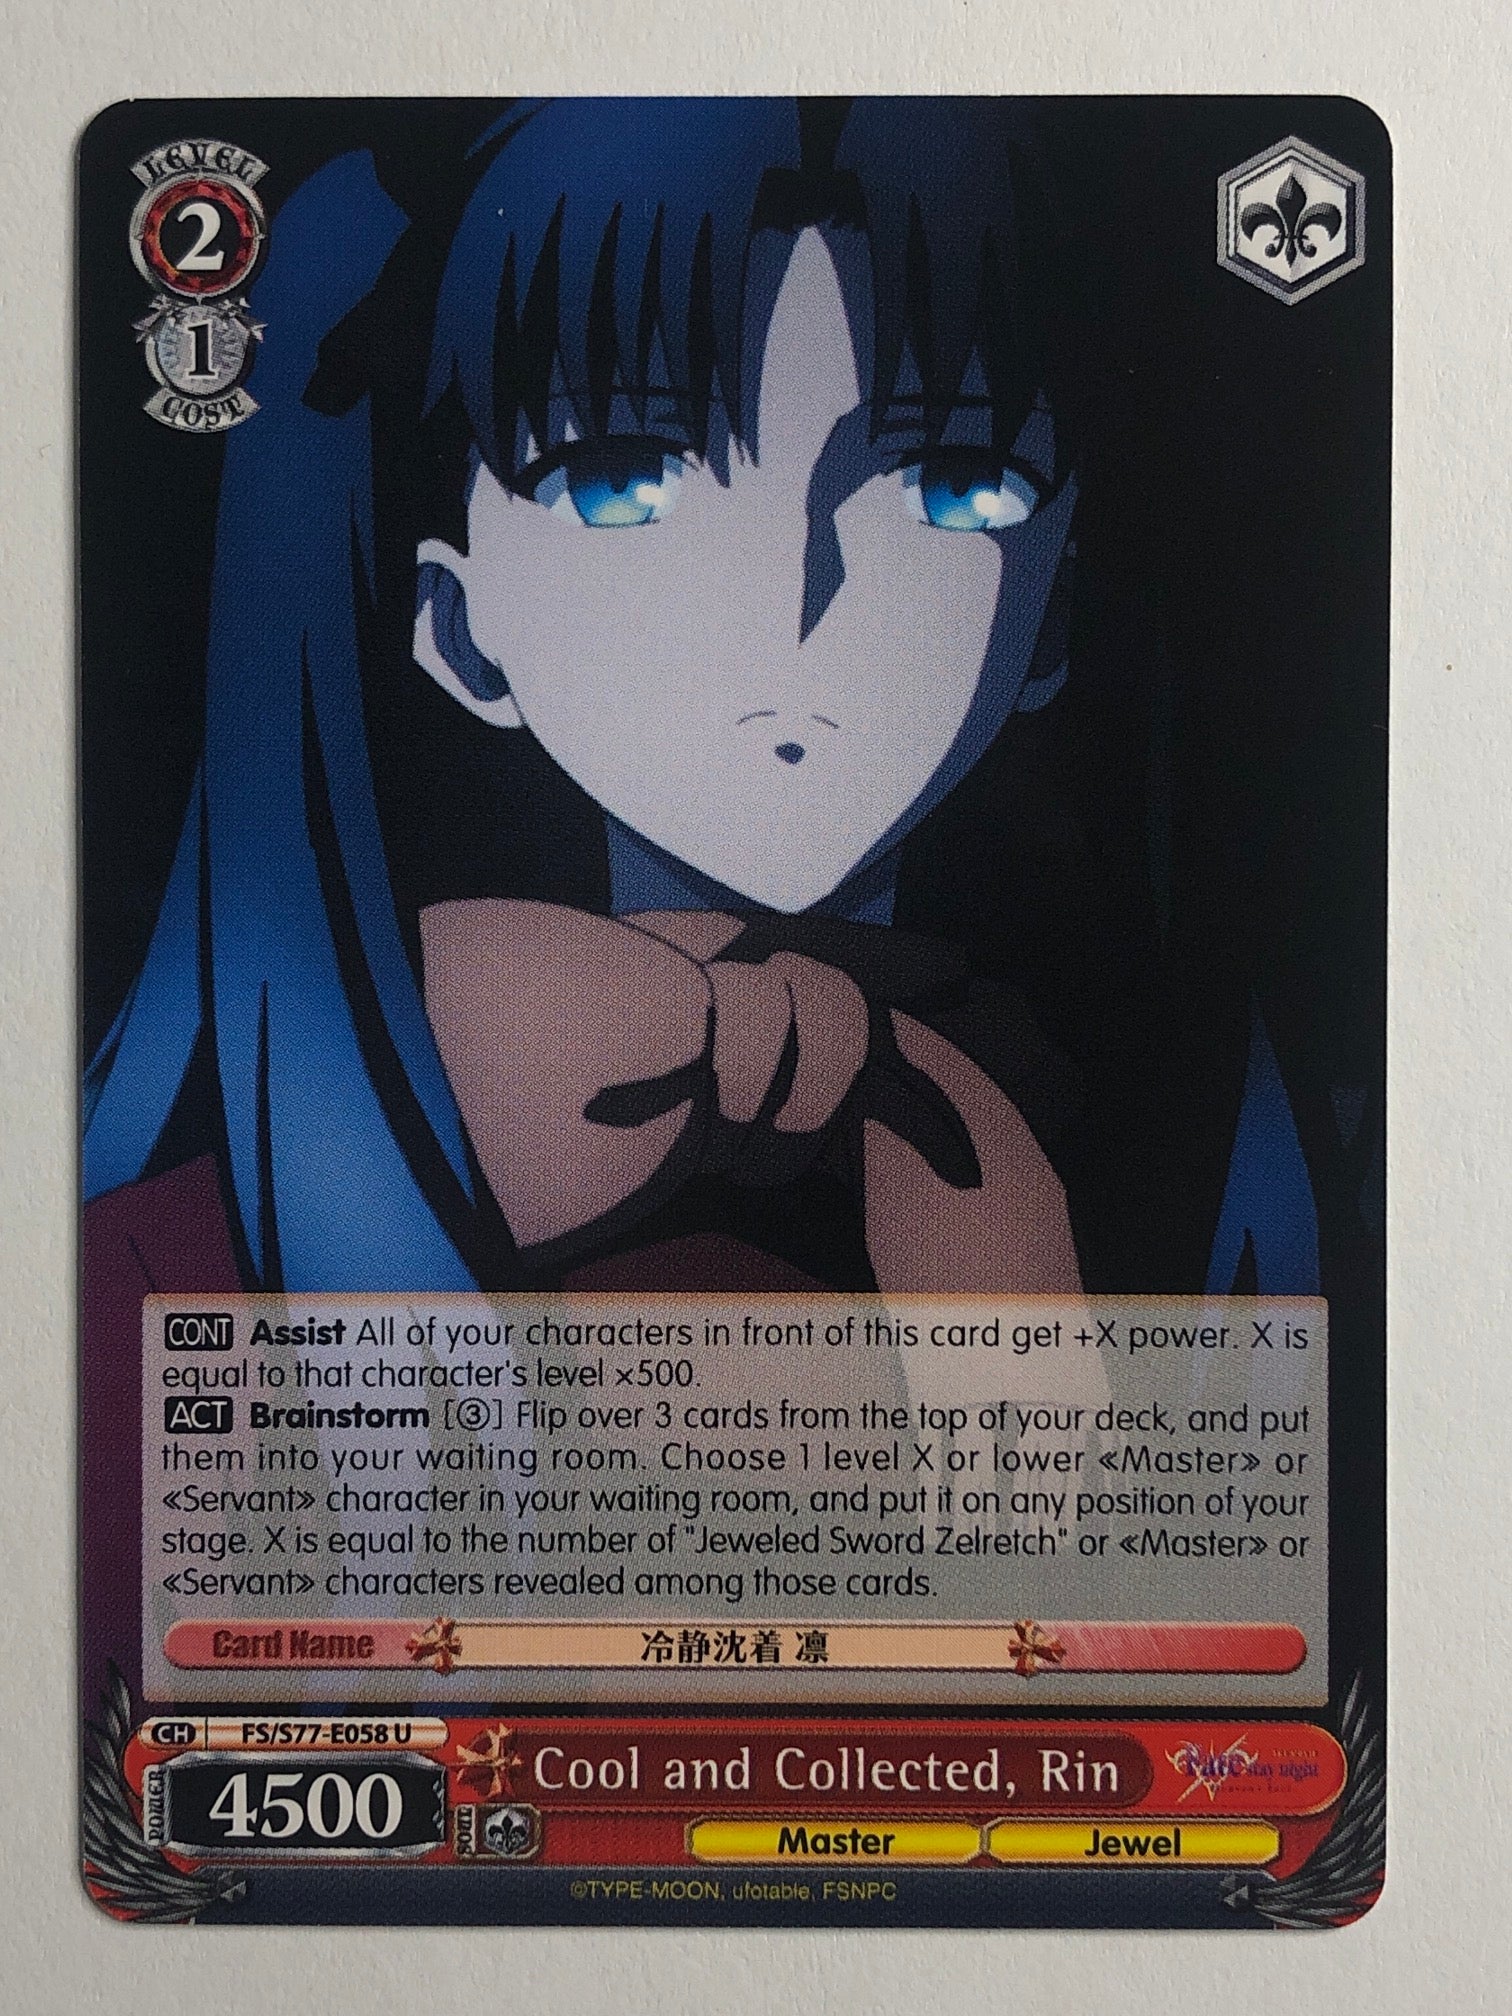 Cool and Collected, Rin - FS/S77-E058 U (M/NM)